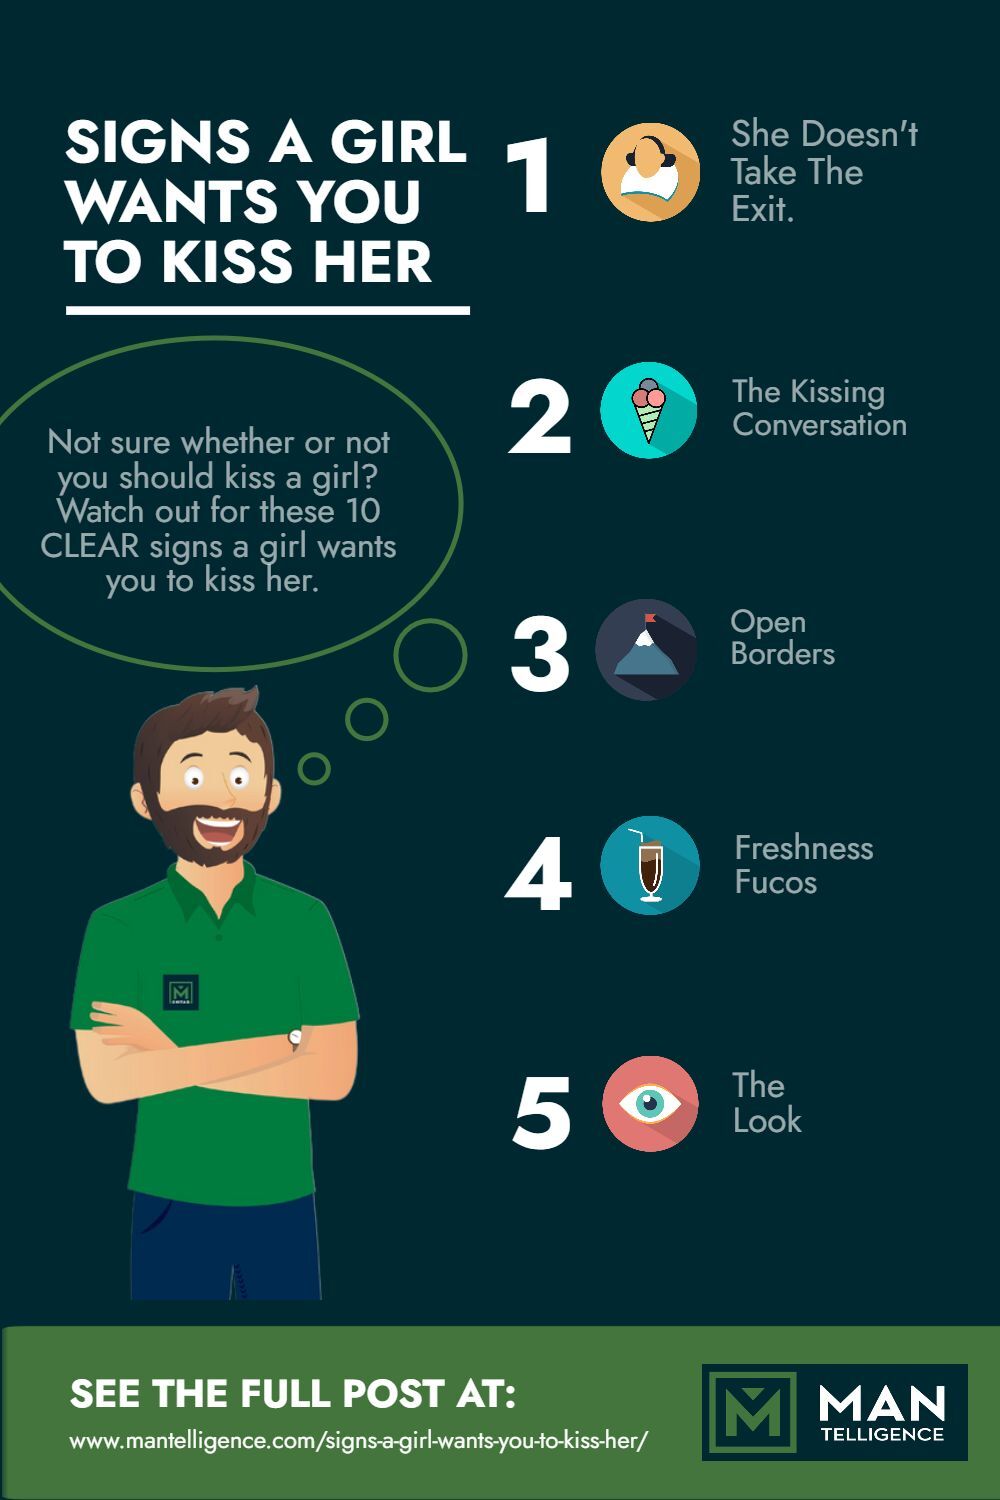 Signs A Girl Wants You To Kiss Her - Infographic